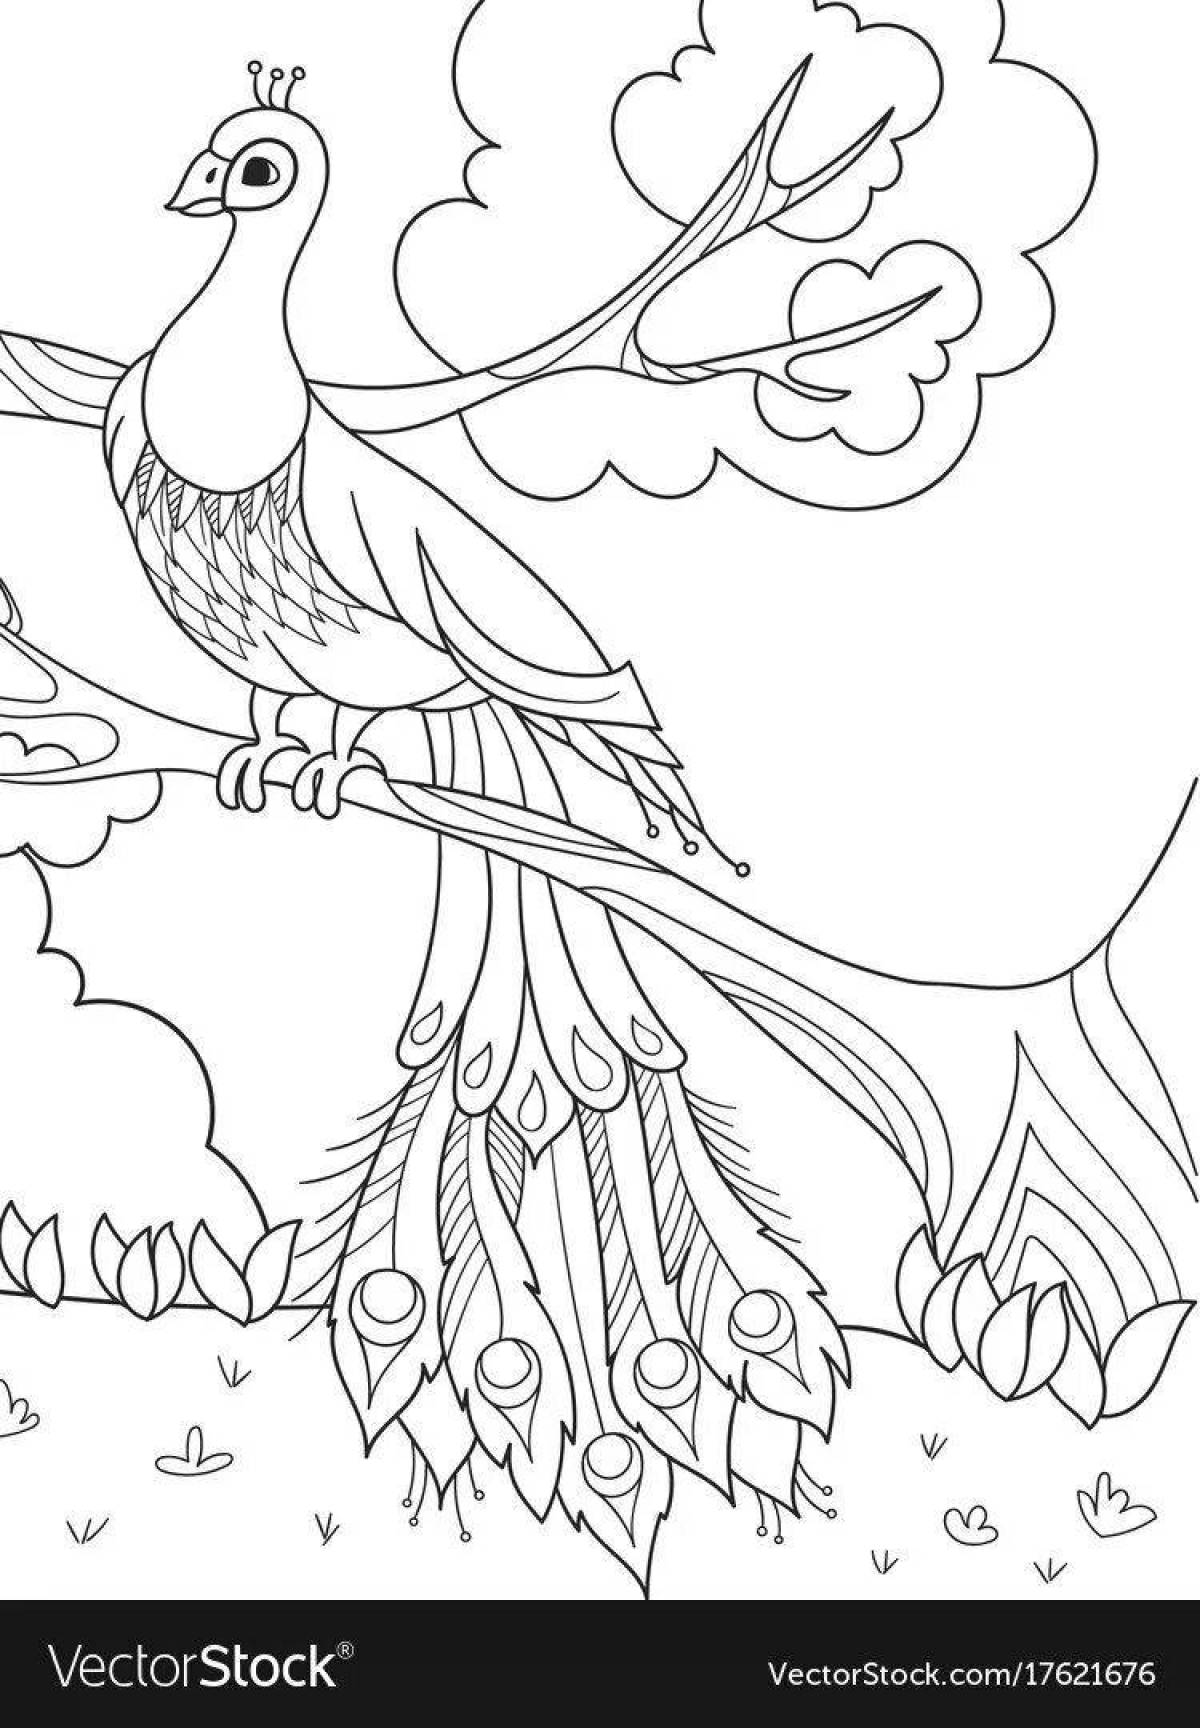 Coloring book beautiful ivan tsarevich and the firebird